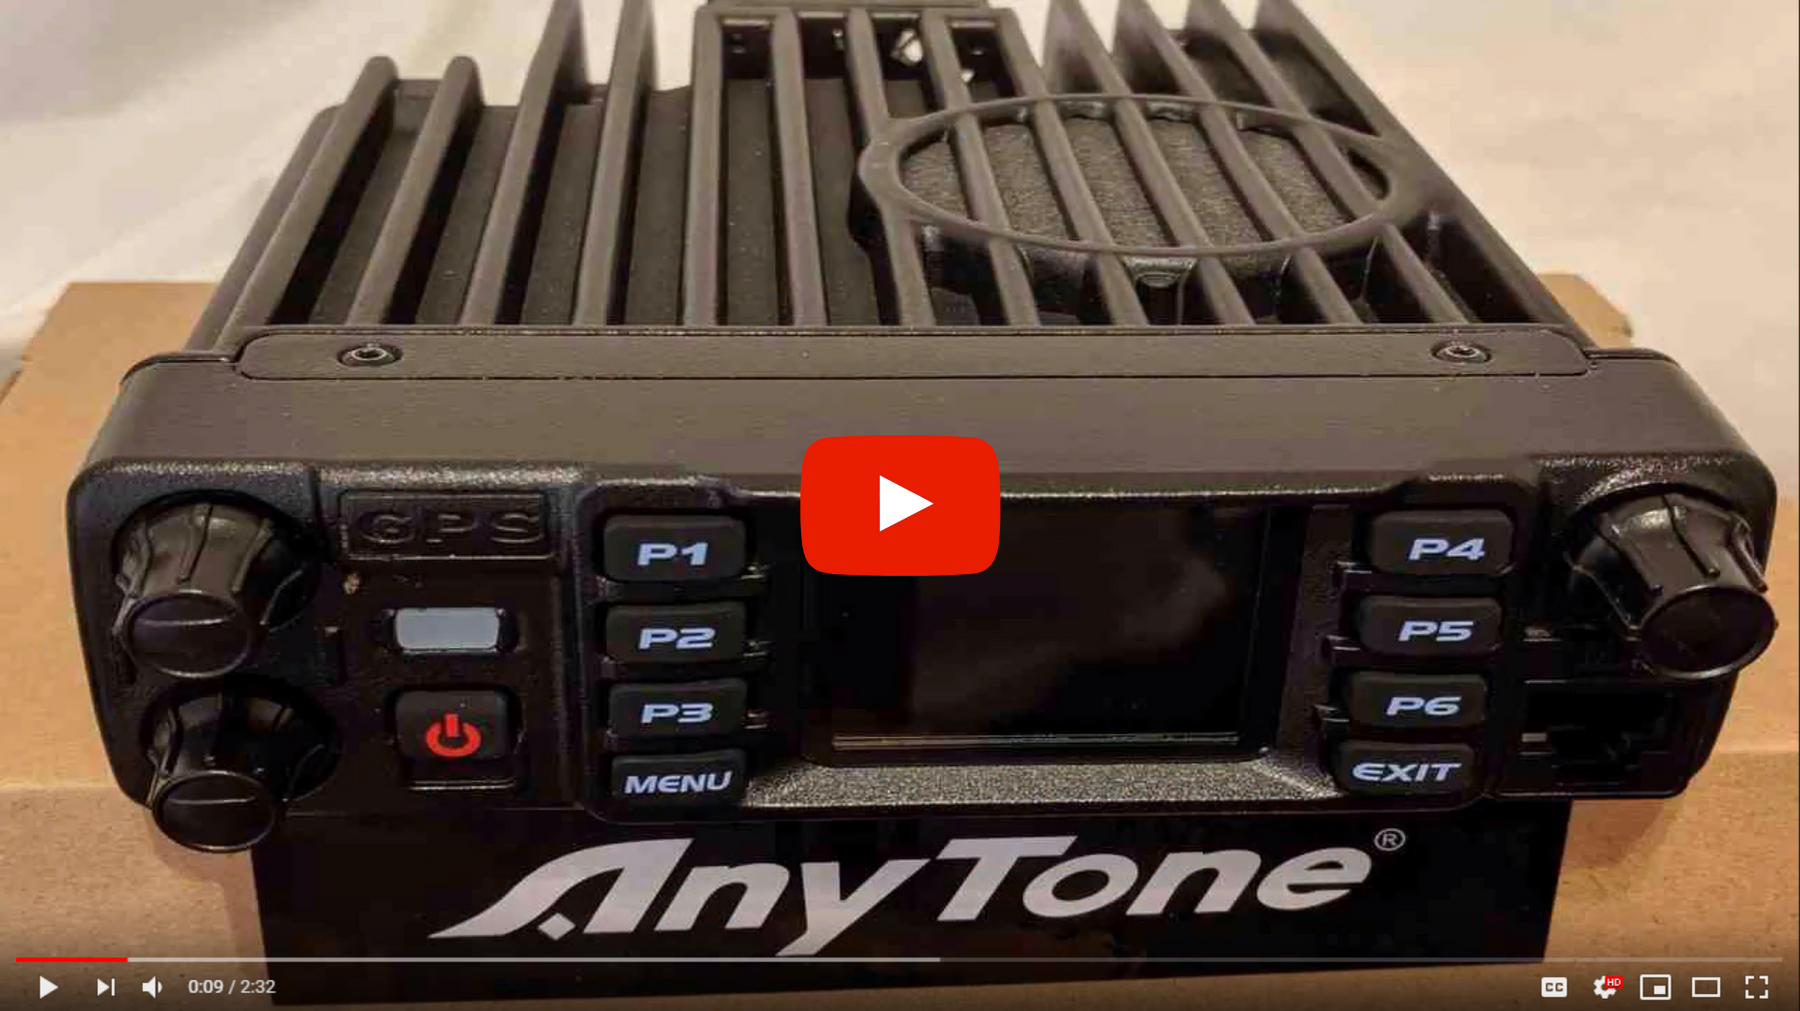 First Look at the AnyTone 578 Mobile